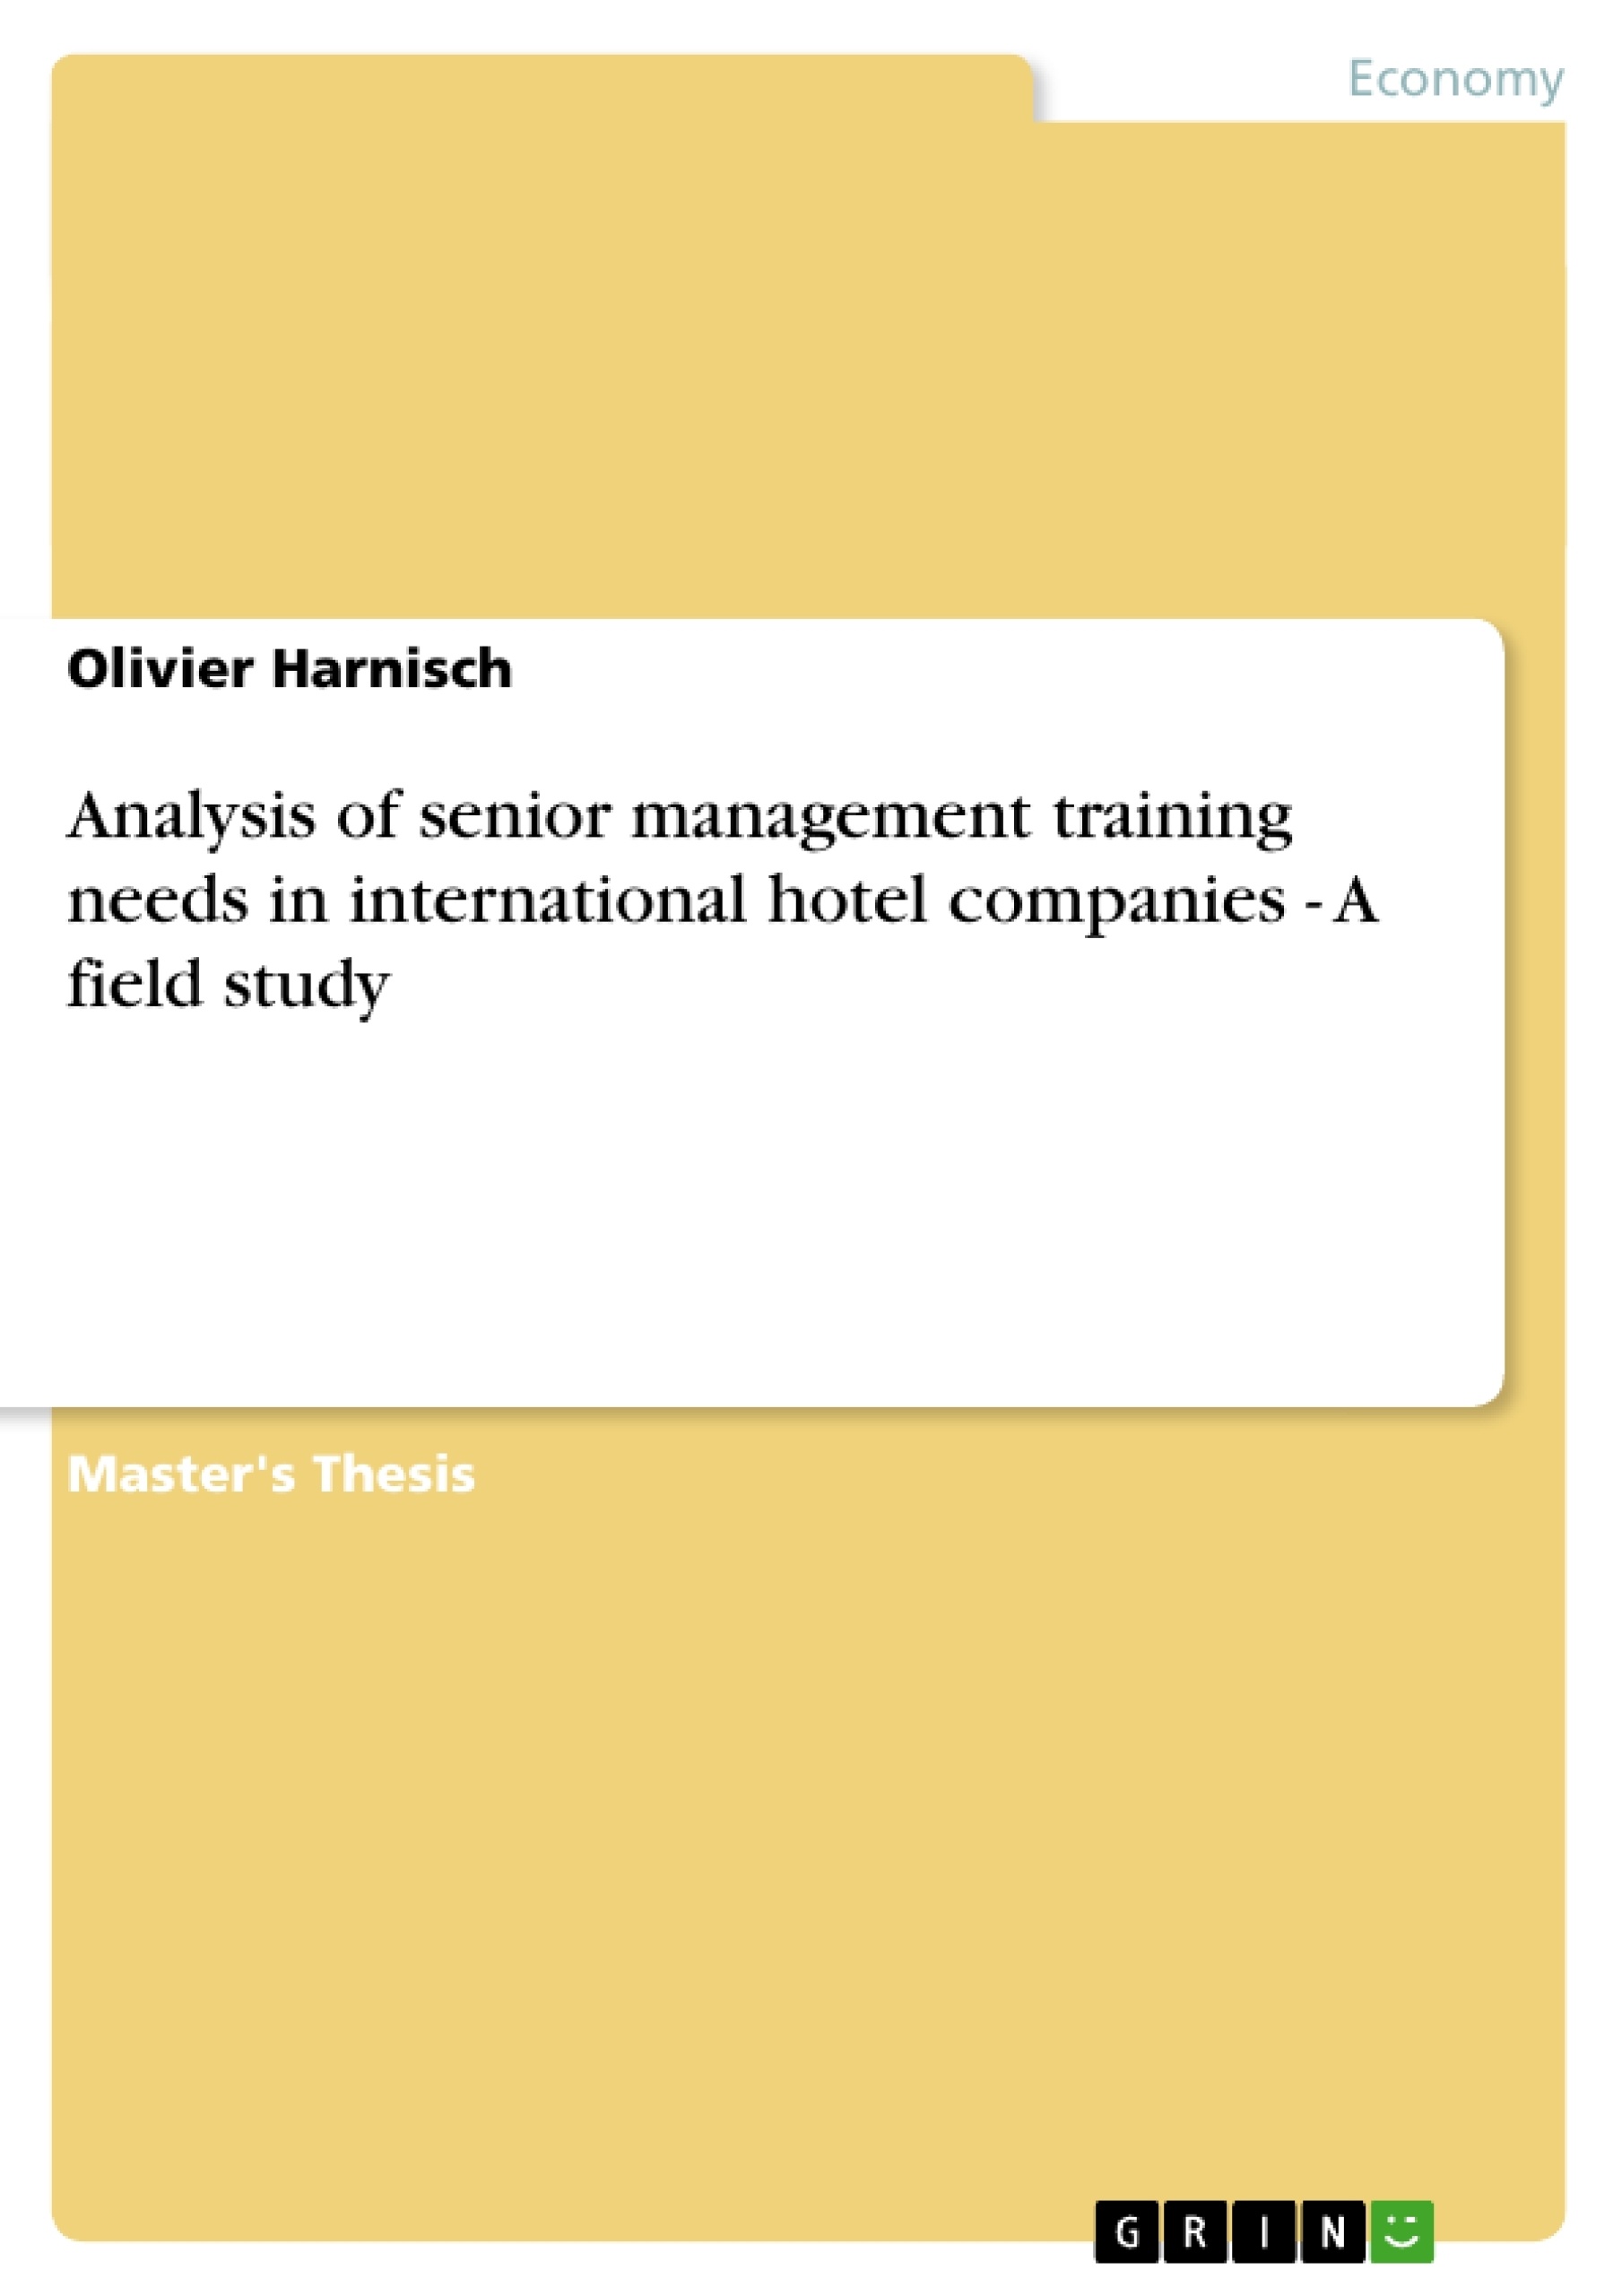 Title: Analysis of senior management training needs in international hotel companies  -  A field study